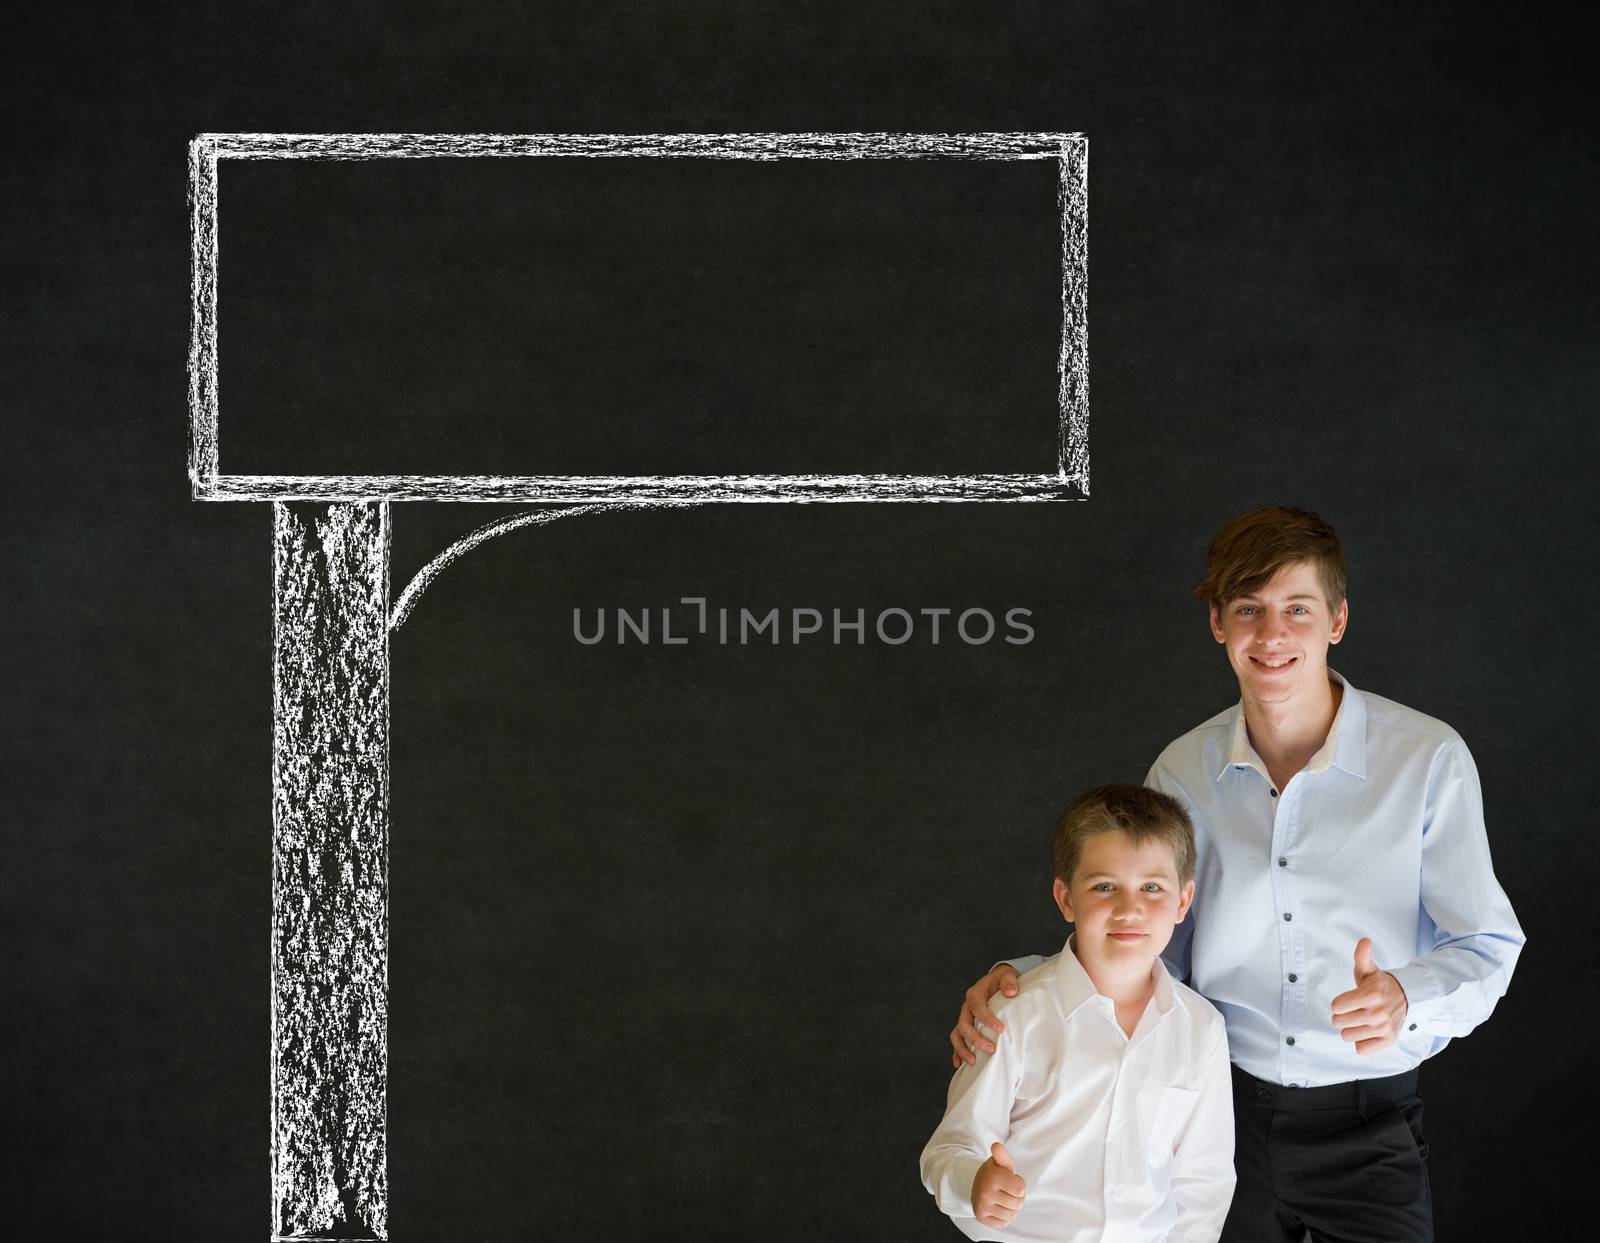 Thumbs up boy business man and teacher with chalk road advertising sign by alistaircotton